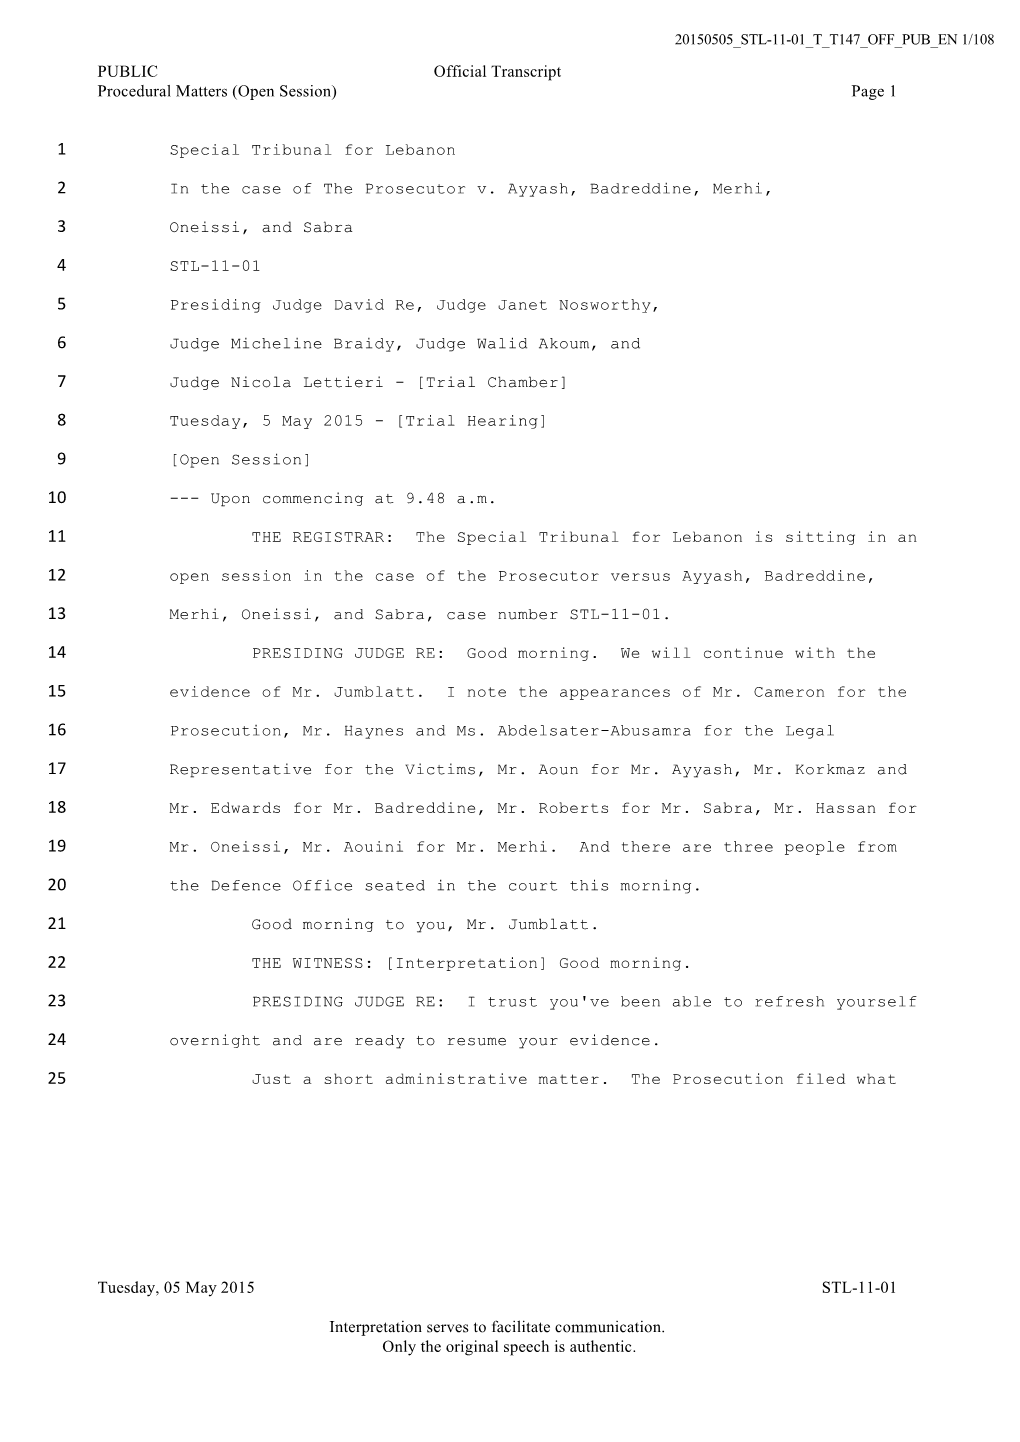 Public Transcript of the Hearing Held on 5 May 2015 in the Case Of